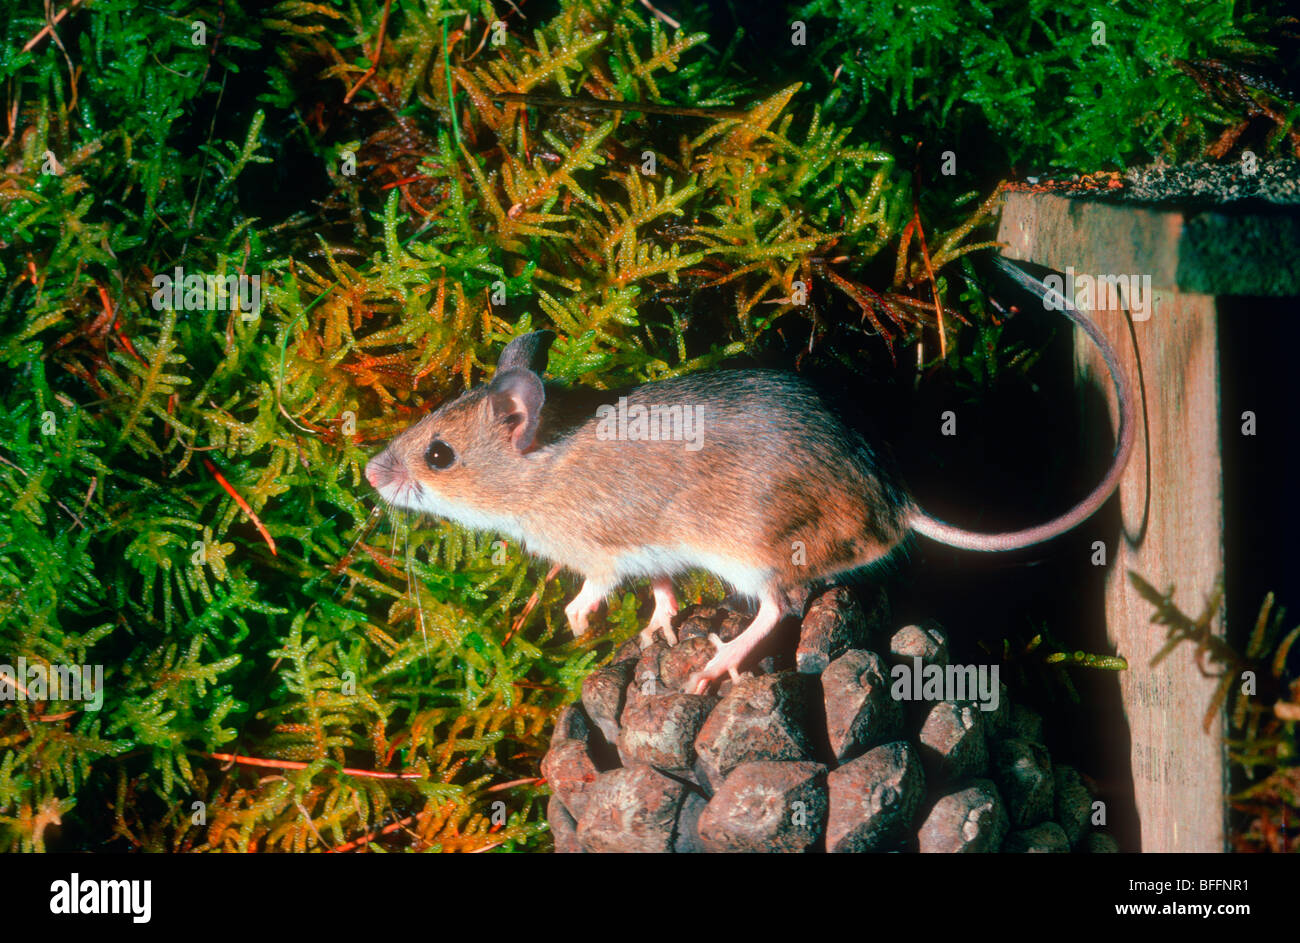 Wood Mouse, Apodemus sylvaticus. On forest ground Stock Photo